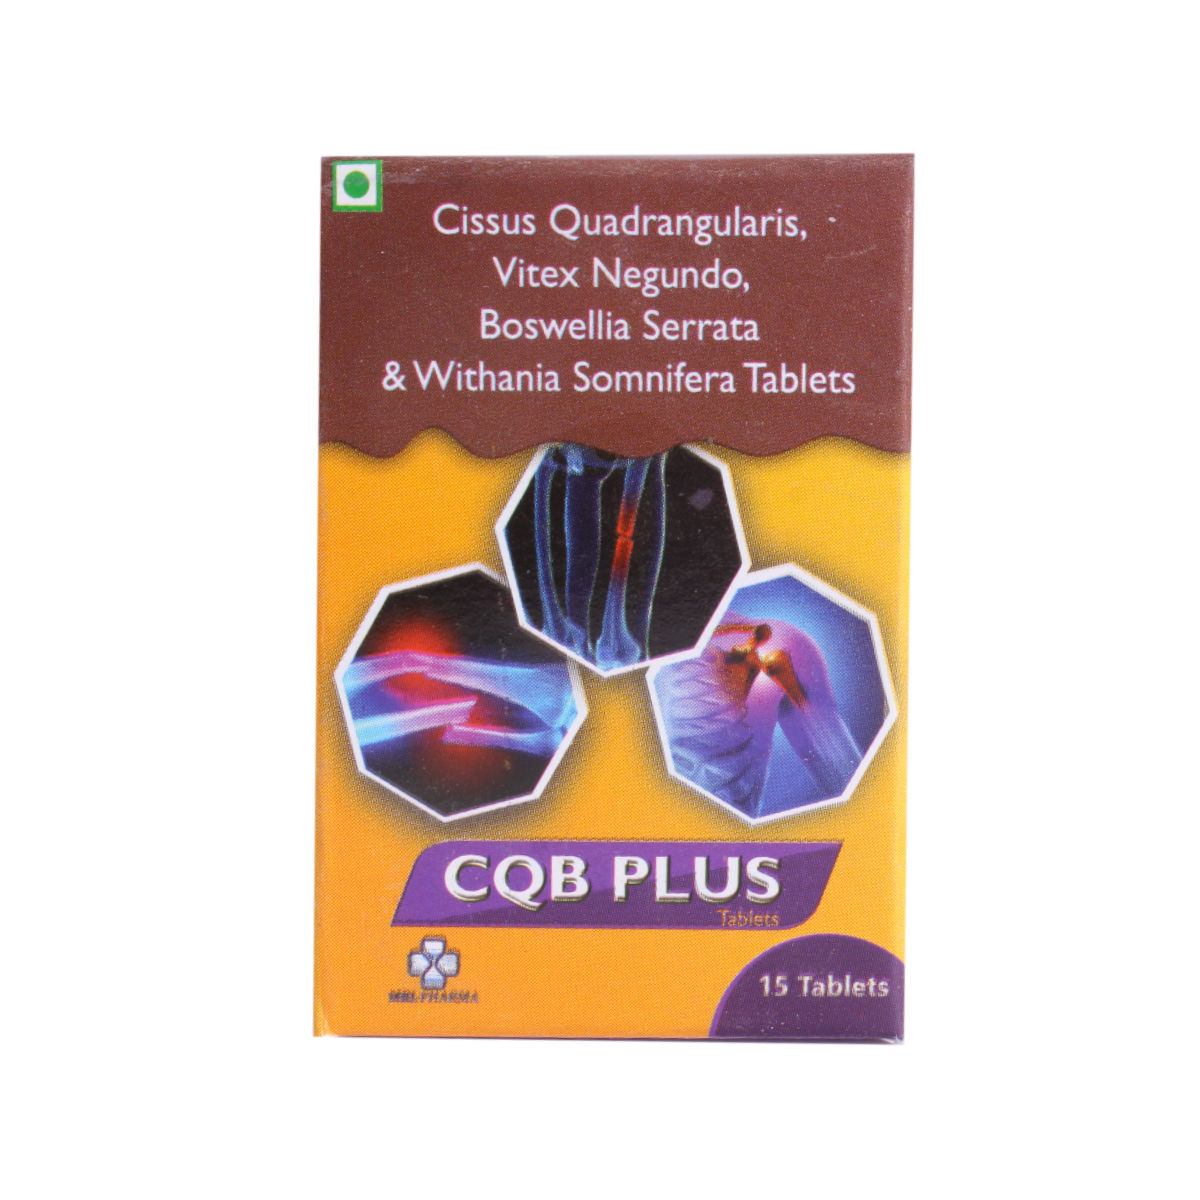 Cqb Plus Tablet 15's, Pack of 1 